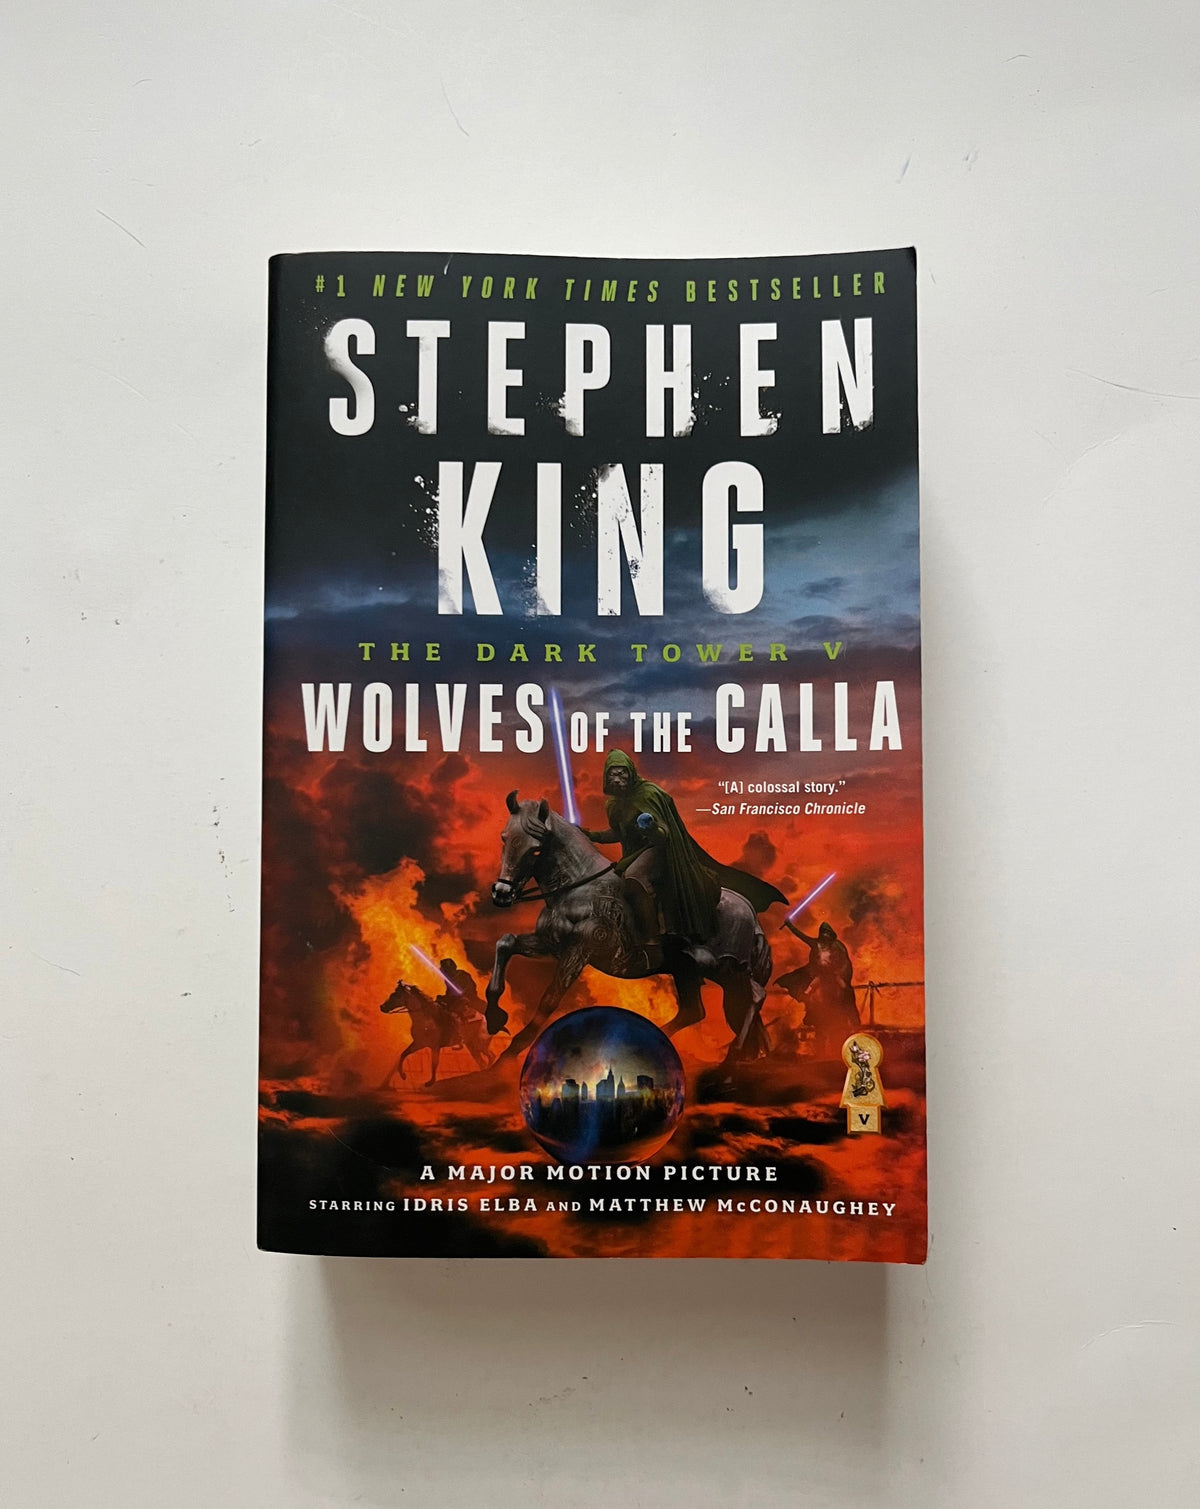 The Dark Tower V: Wolves of the Calla by Stephen King